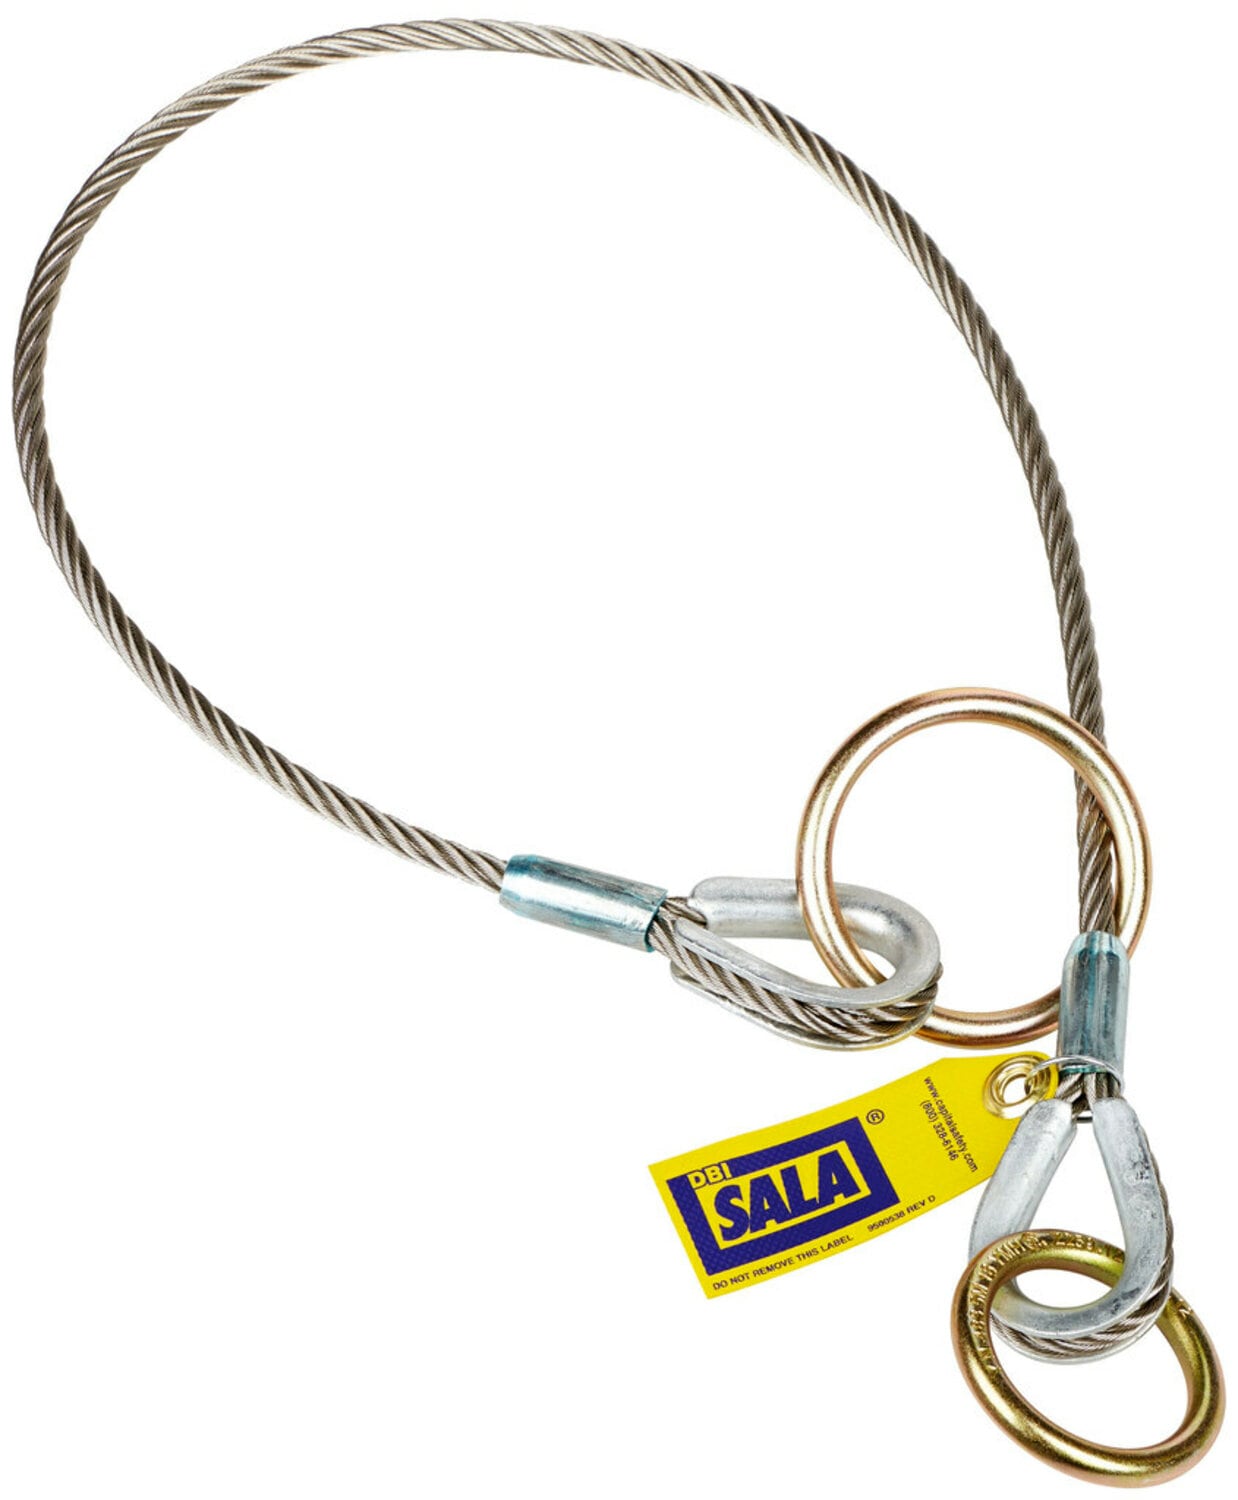 7012819625 - 3M DBI-SALA Pass-Thru Cable Tie-Off Adapter Anchor 5900564, Stainless Steel, 5 ft